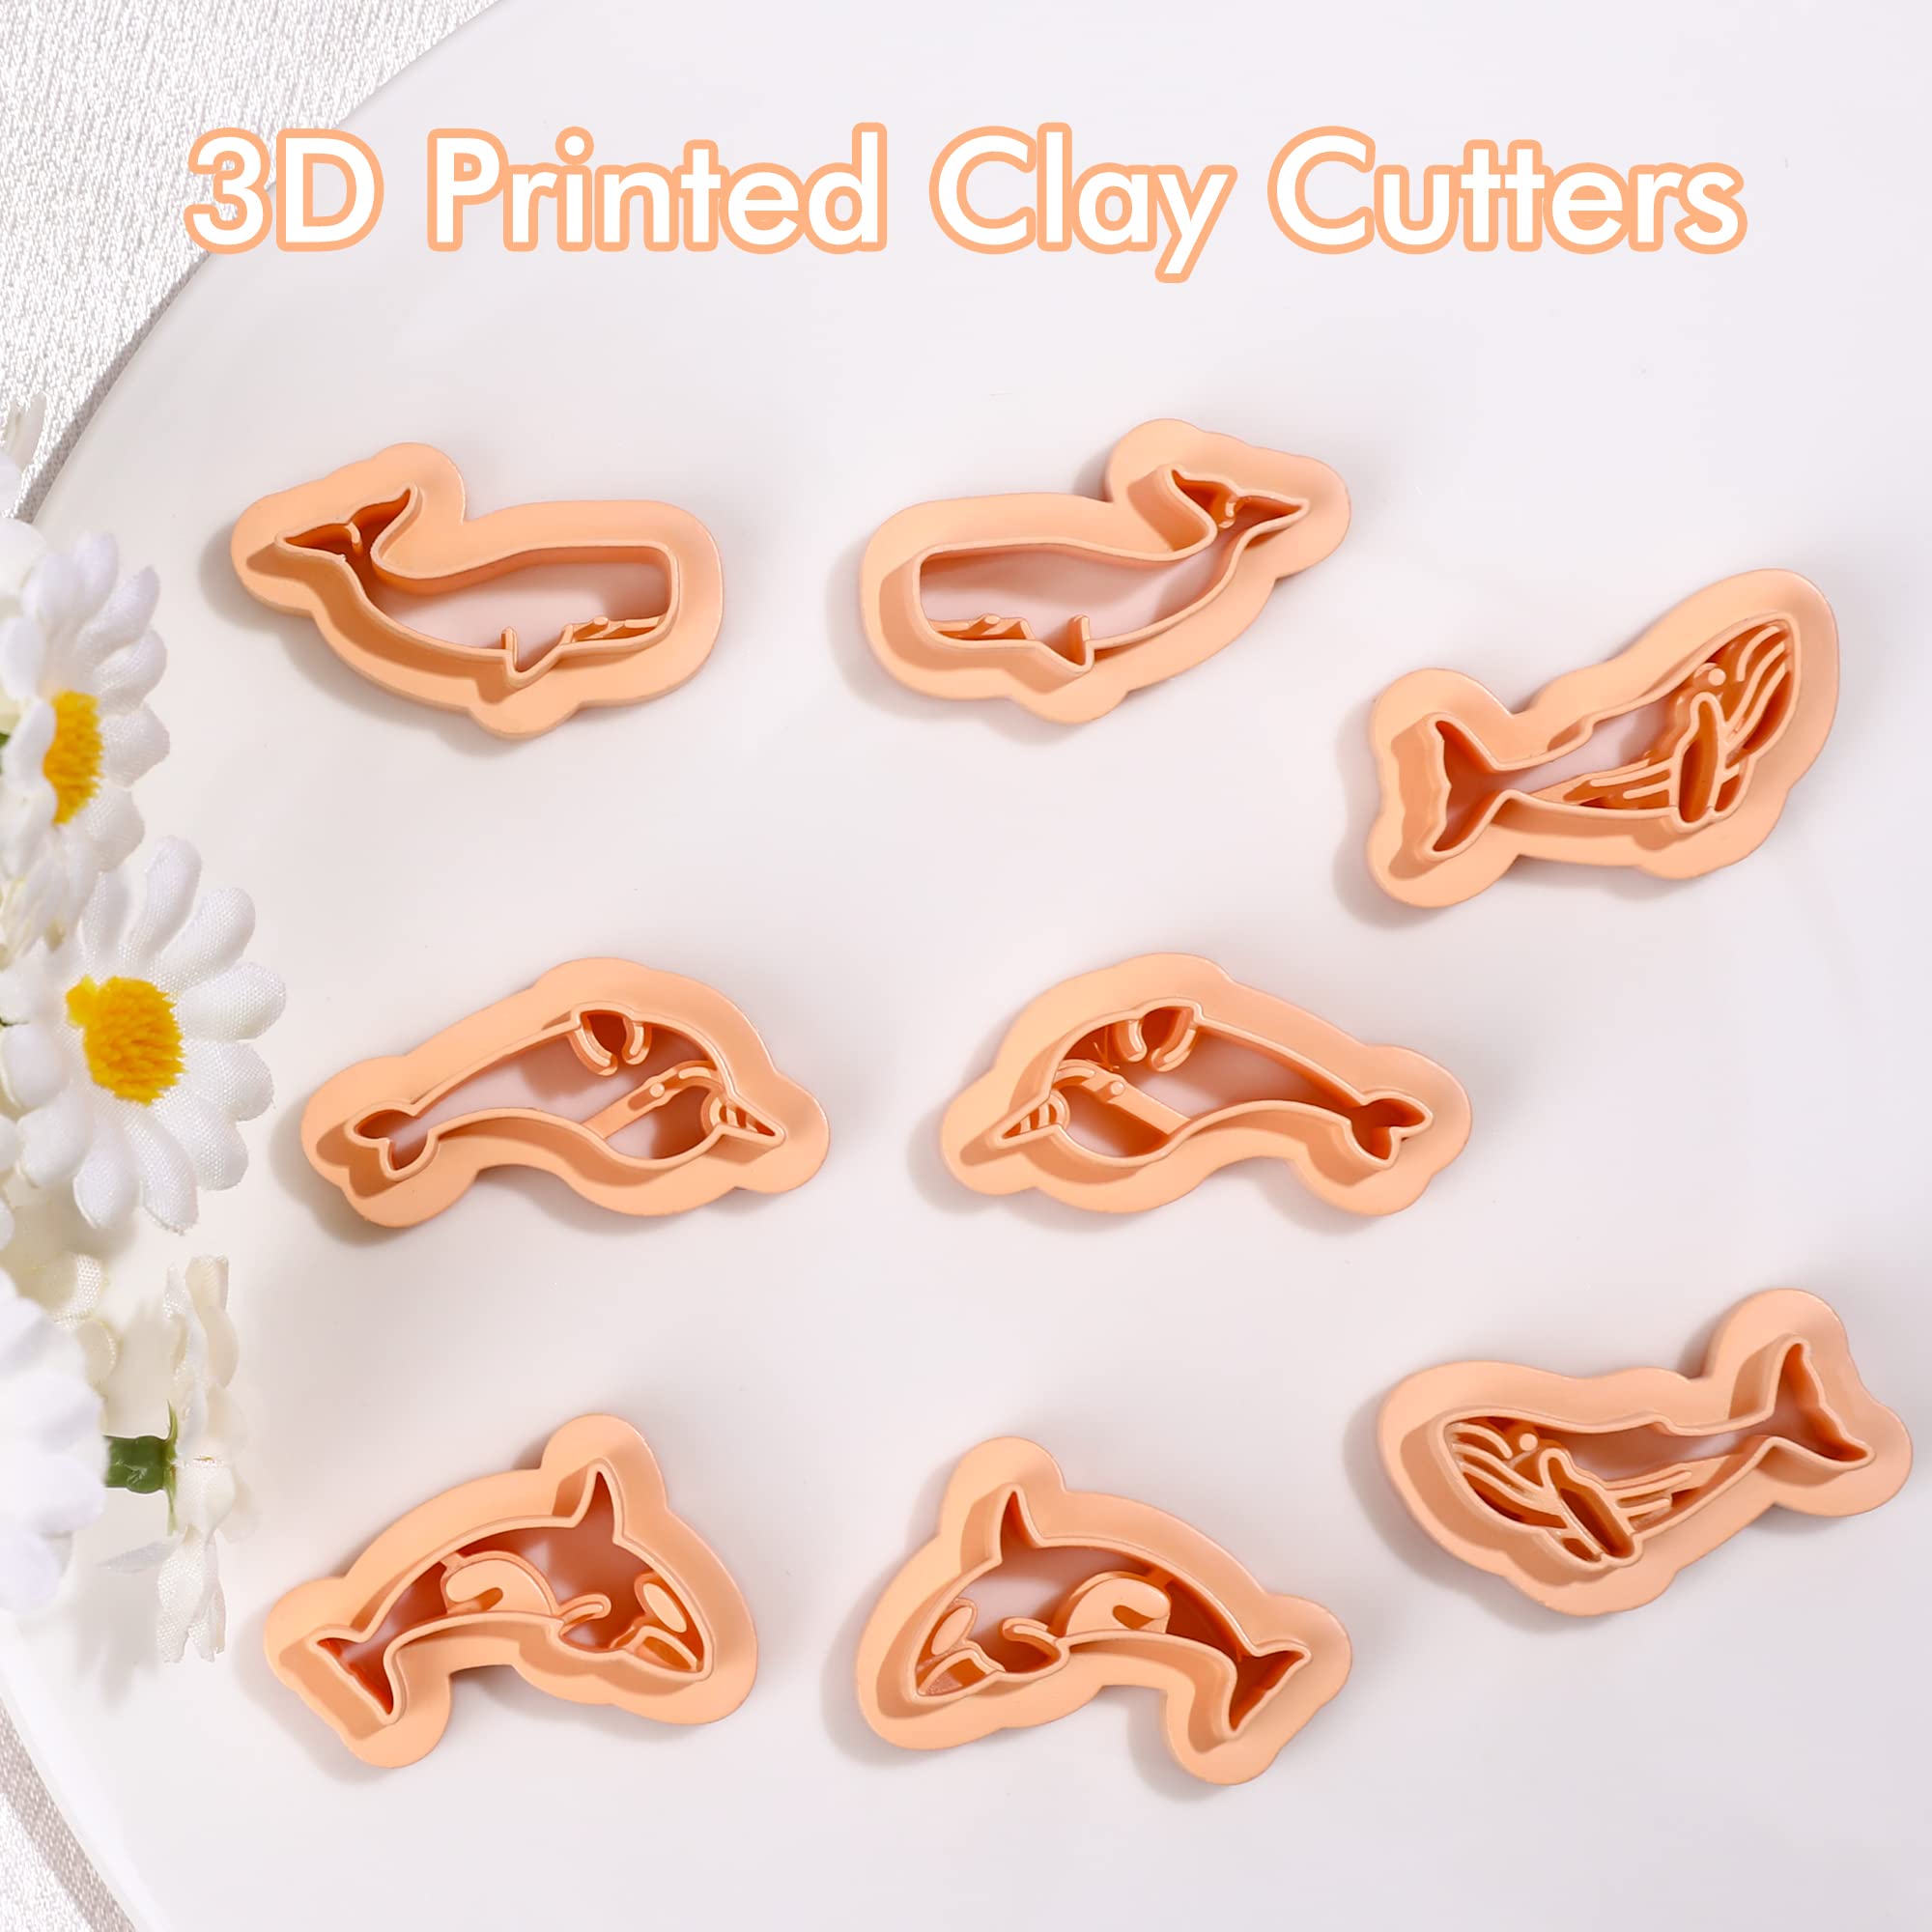 Puocaon Cat Polymer Clay Cutters - Embossing Animal Cutters Set, Cute  Kitten Clay Cutters for Polymer Clay Jewelry Making Paw Cat Moon Dangle Set  Clay Cutters, Heart Circle Clay Earrings Cutters 